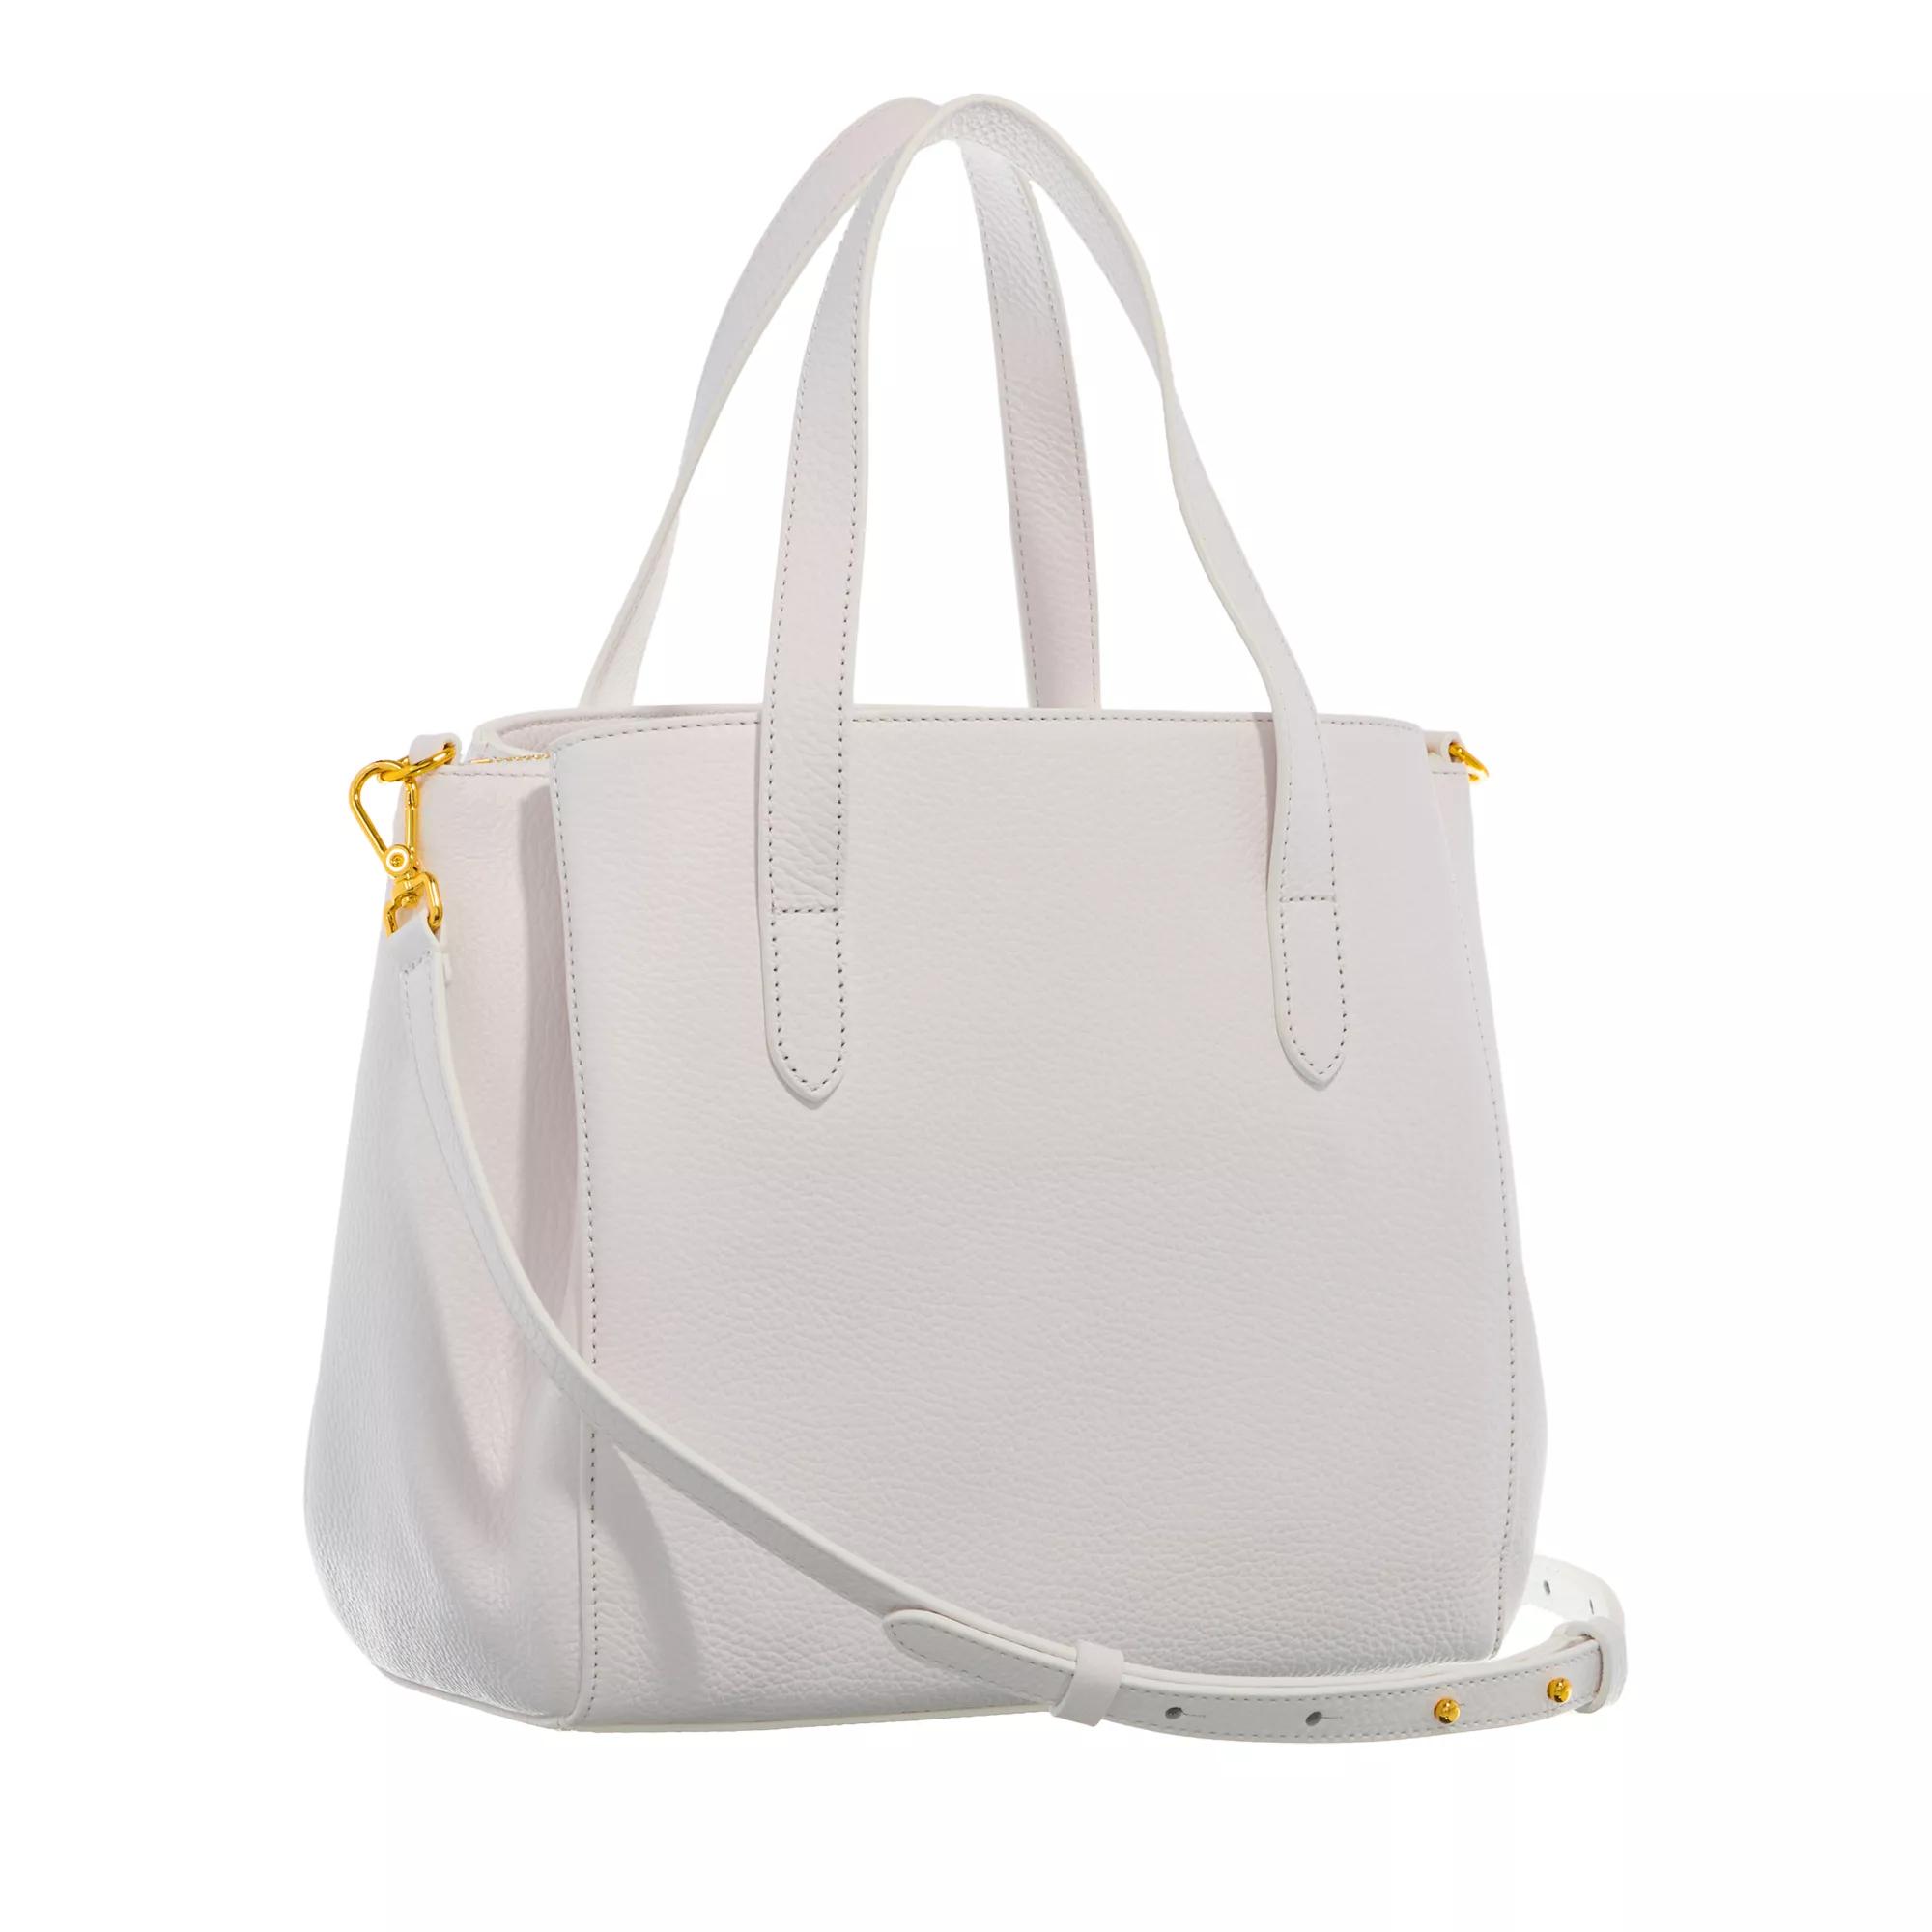 Coccinelle Totes Gleen Handbag in wit